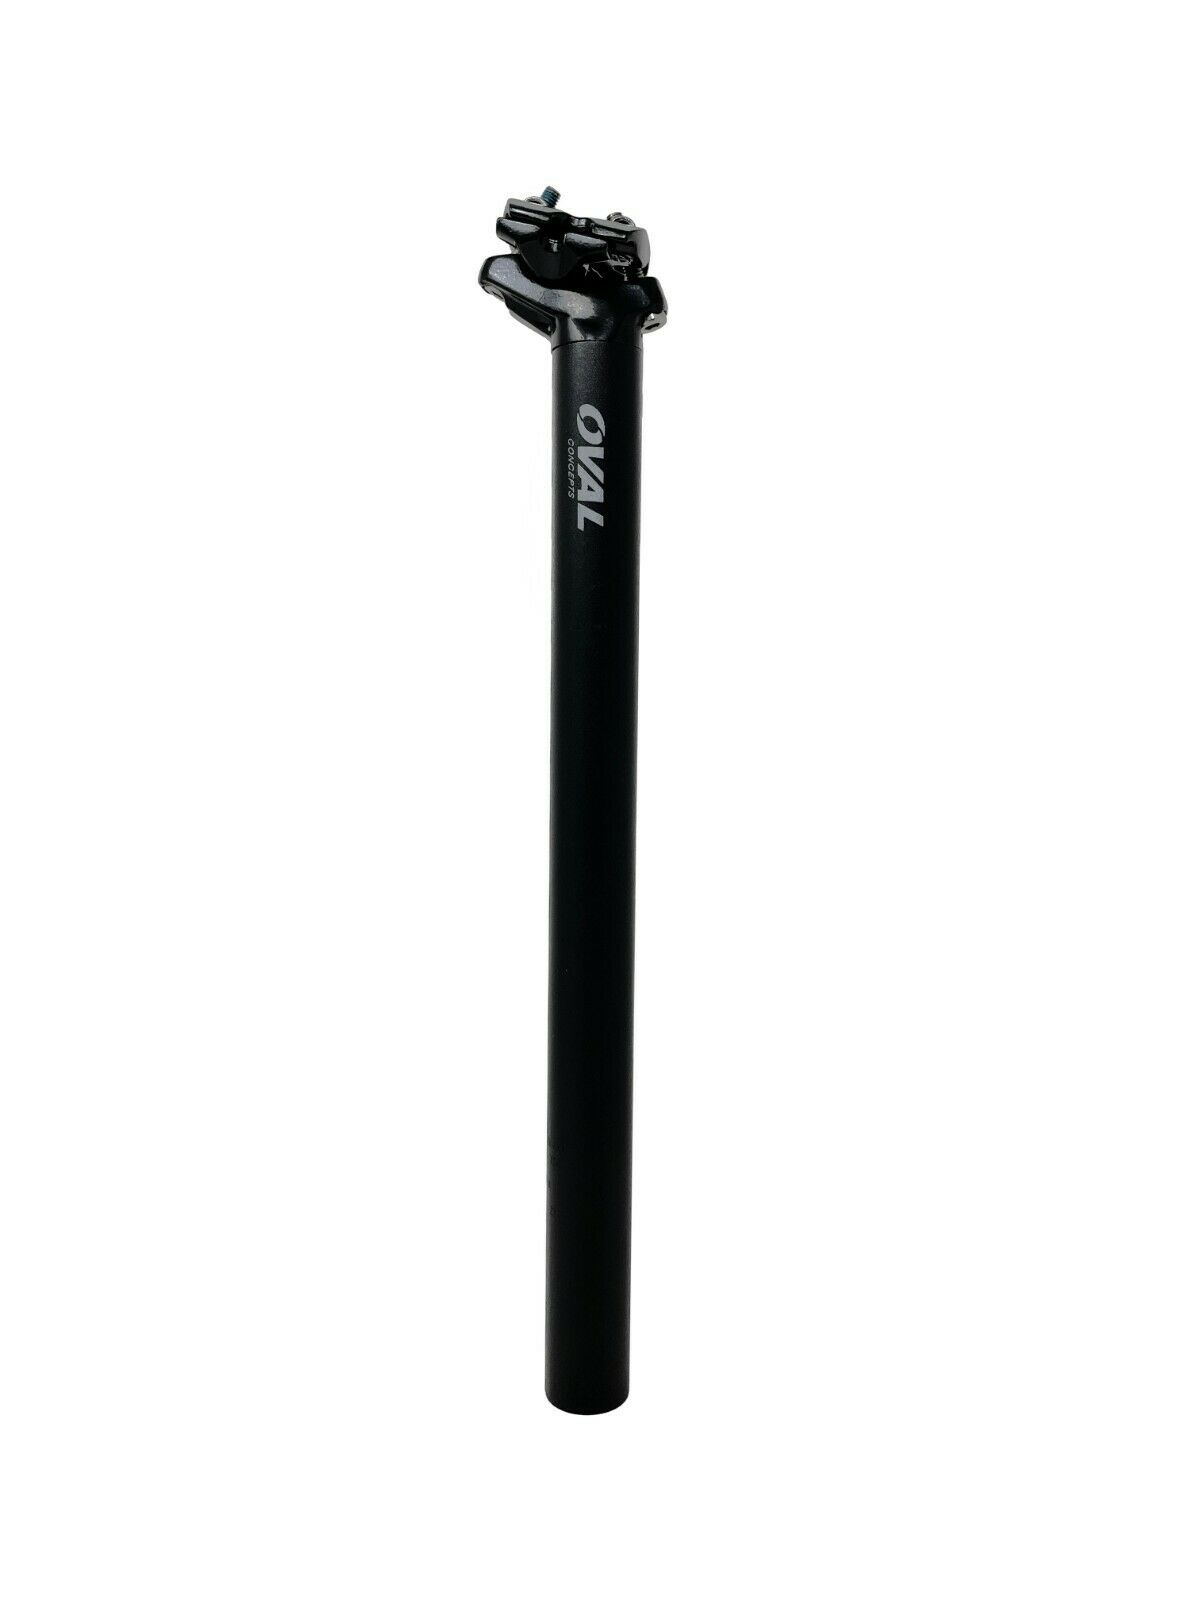 Oval Concepts Alloy Seat Post - 30.9mm - 400mm - 15mm Offset - Sportandleisure.com (7028697956506)